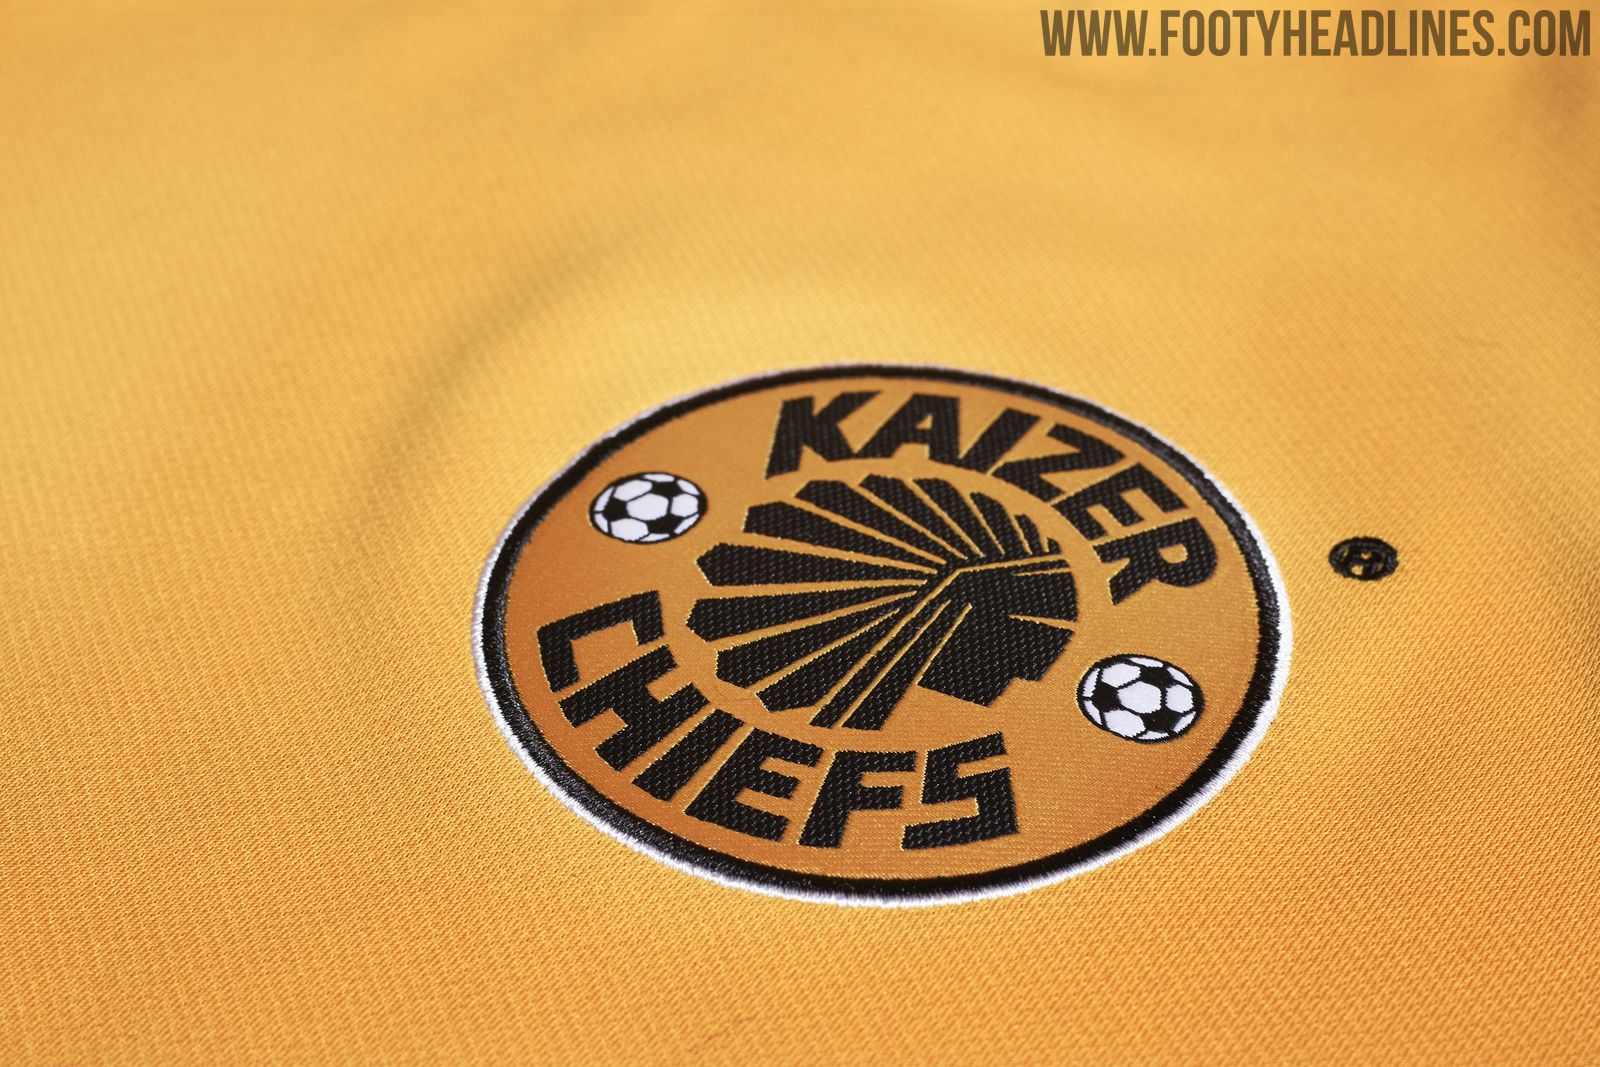 Unique Nike Kaizer Chiefs 18-19 Home & Away Kits Released - Footy Headlines